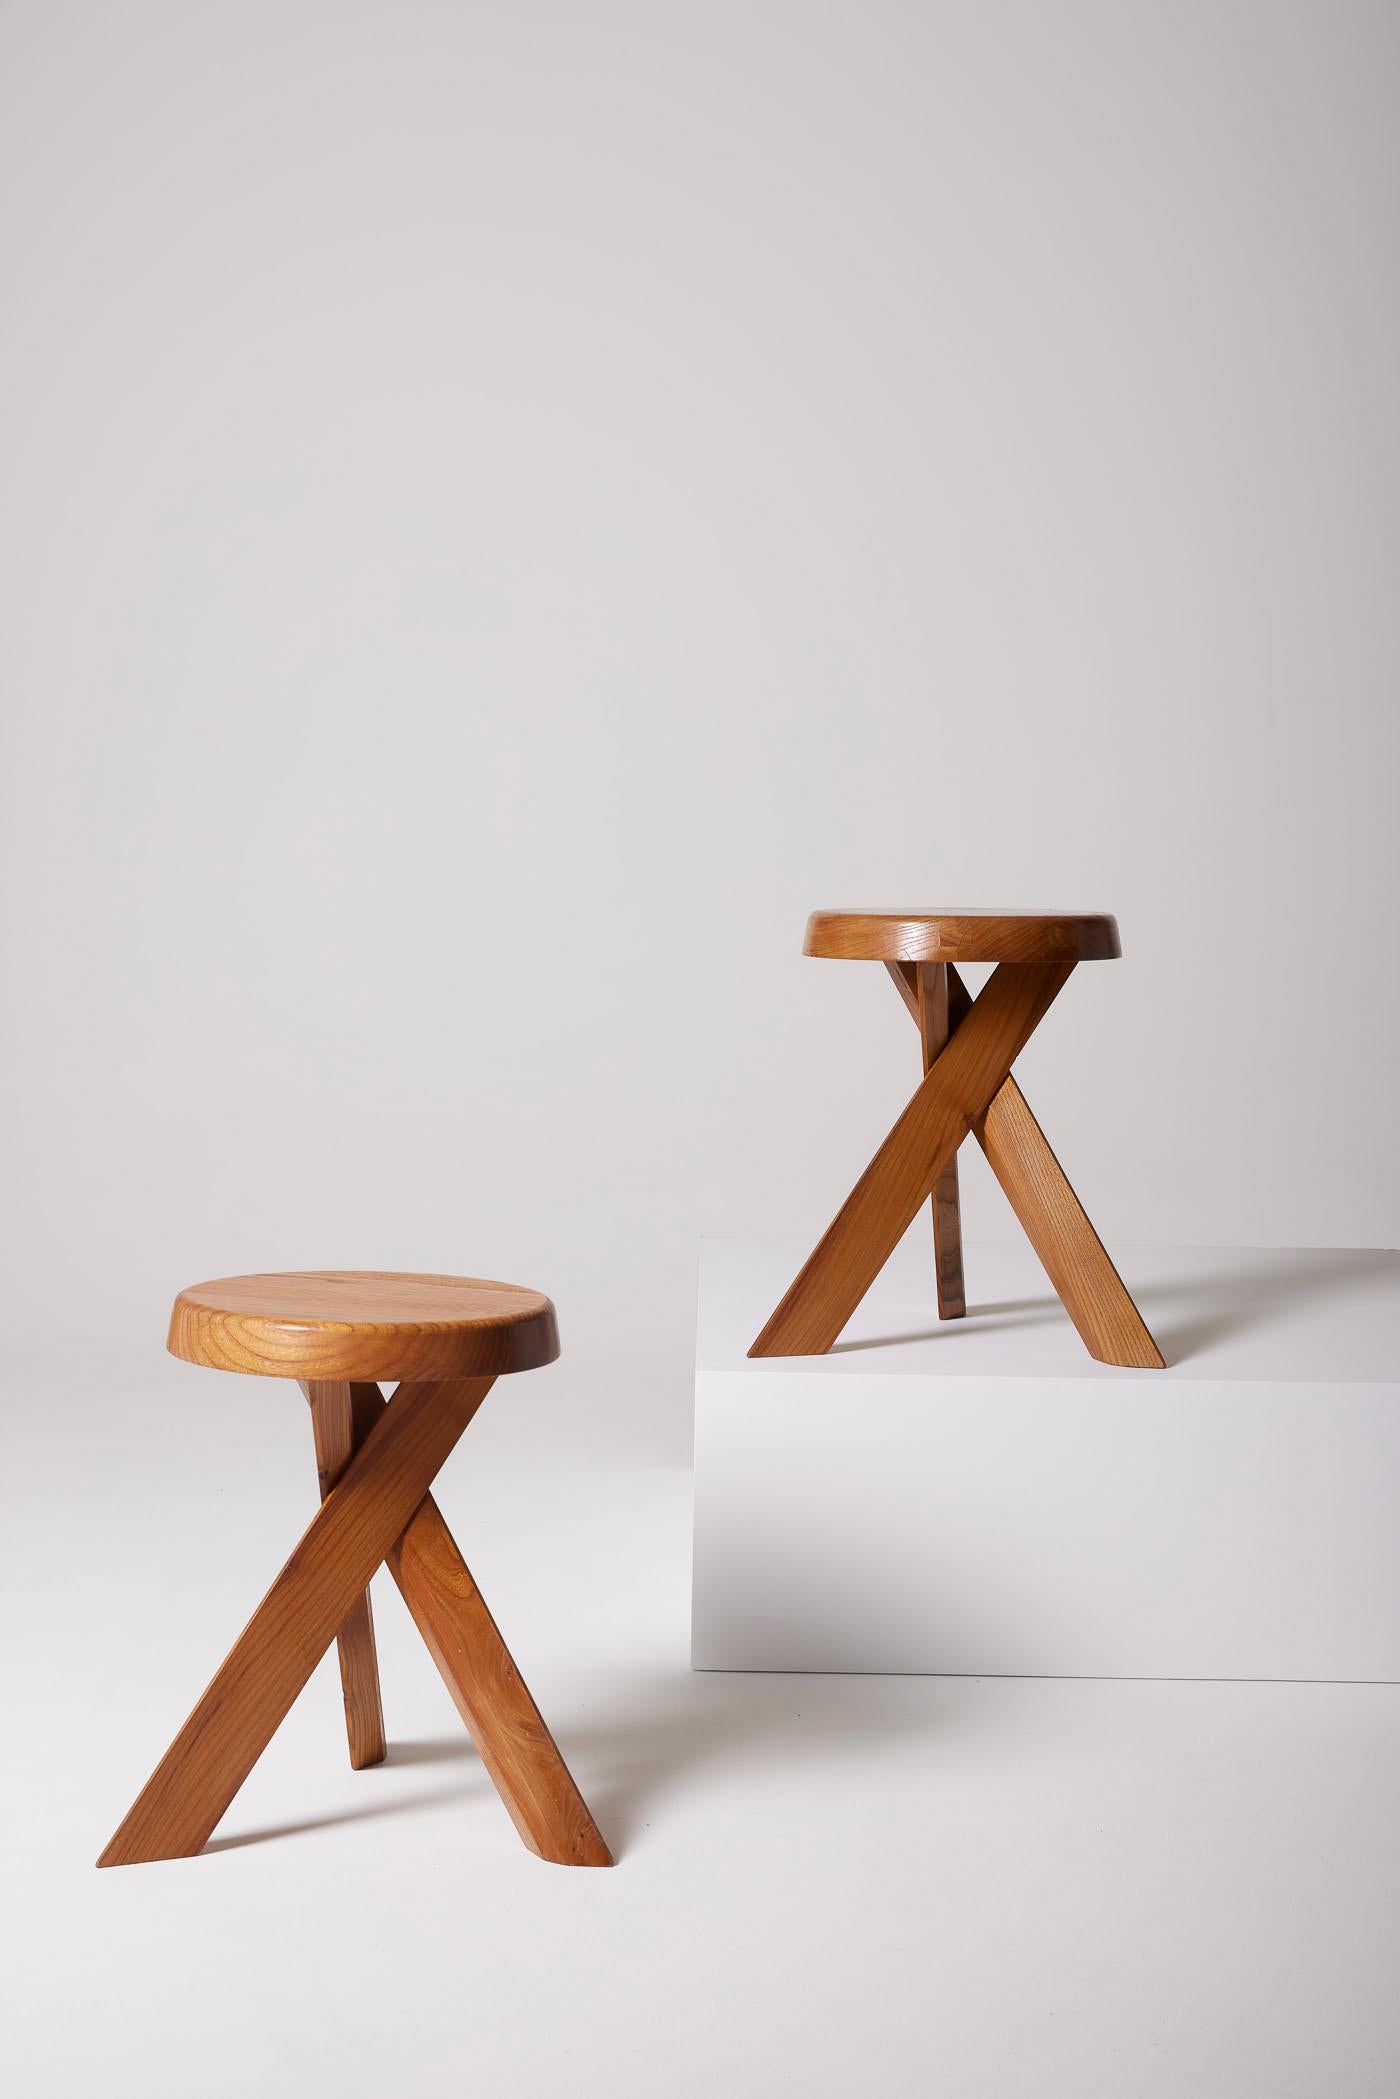 Stool S31 by French designer Pierre Chapo (1927-1987). This iconic stool is made of solid elm. Original edition from the 1970s in perfect original condition. Two stools available.
DV269-270